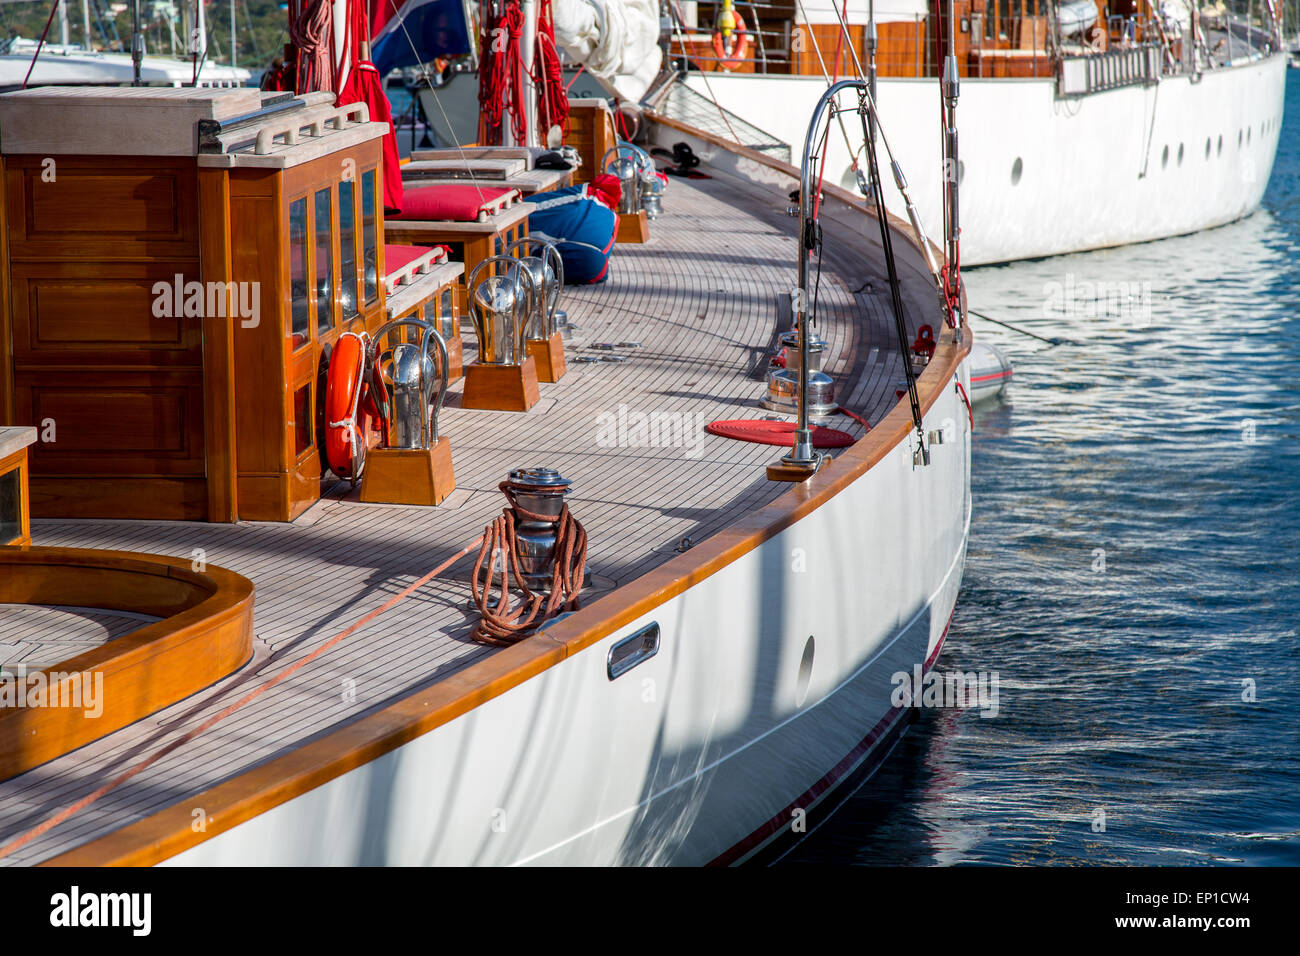 Classic yachts moored in Falmouth, Antigua Stock Photo